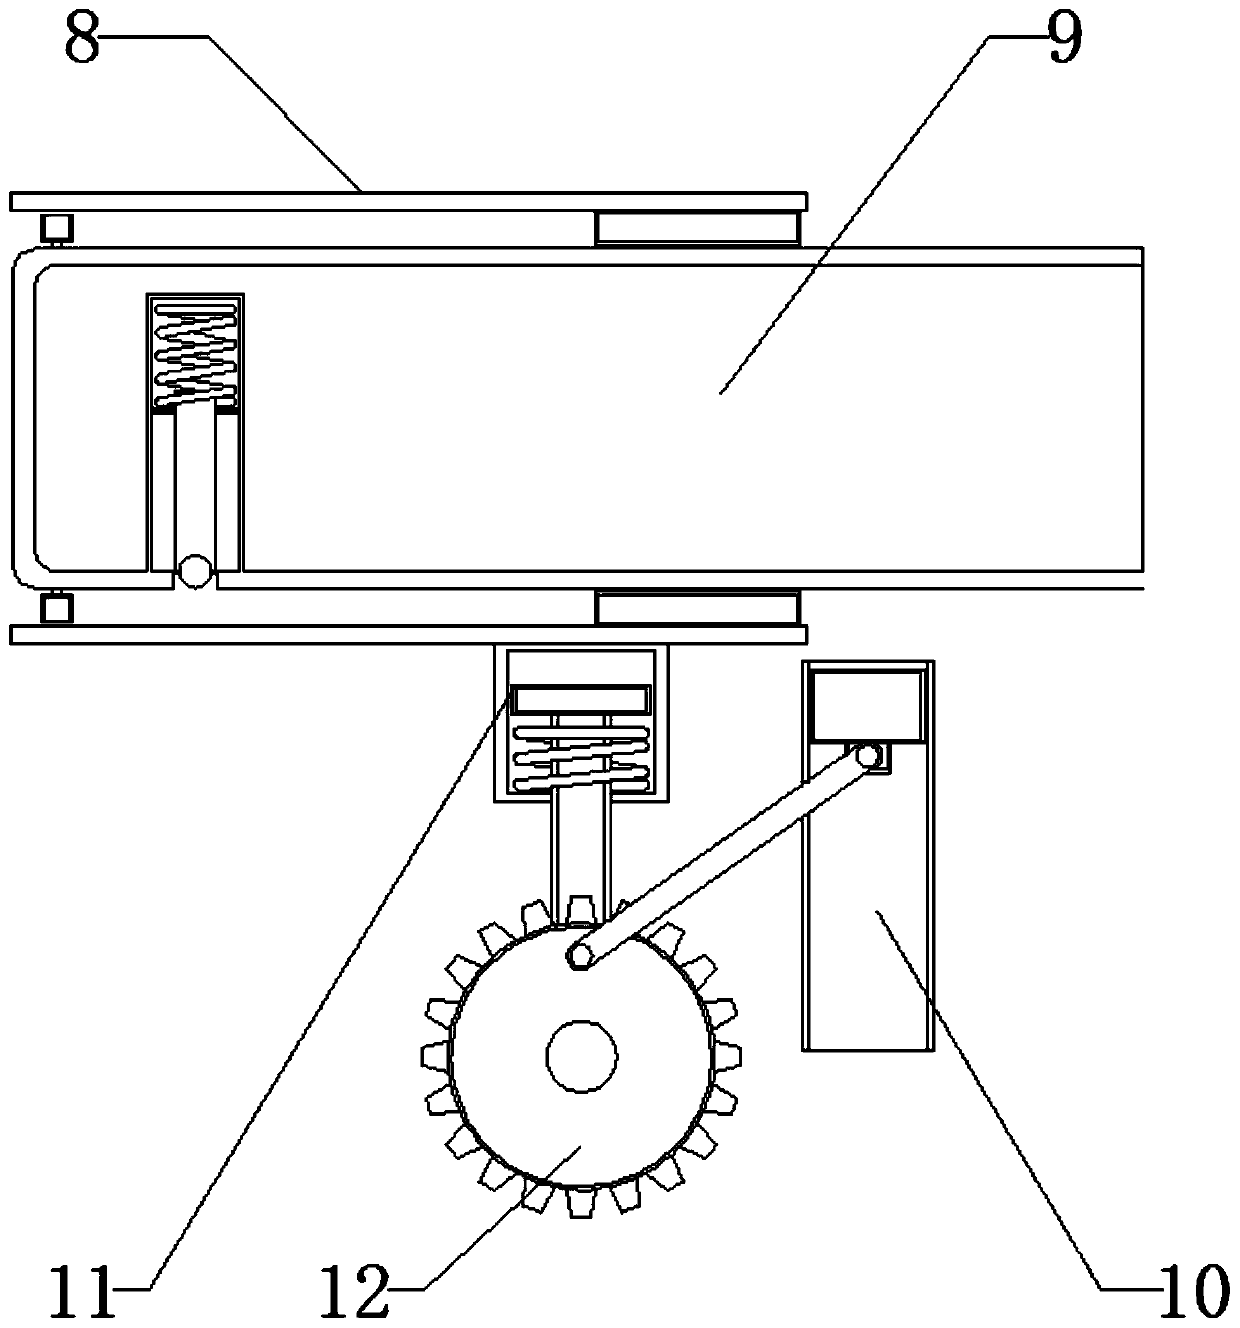 Automatic intelligent locking device utilizing external force during door closing